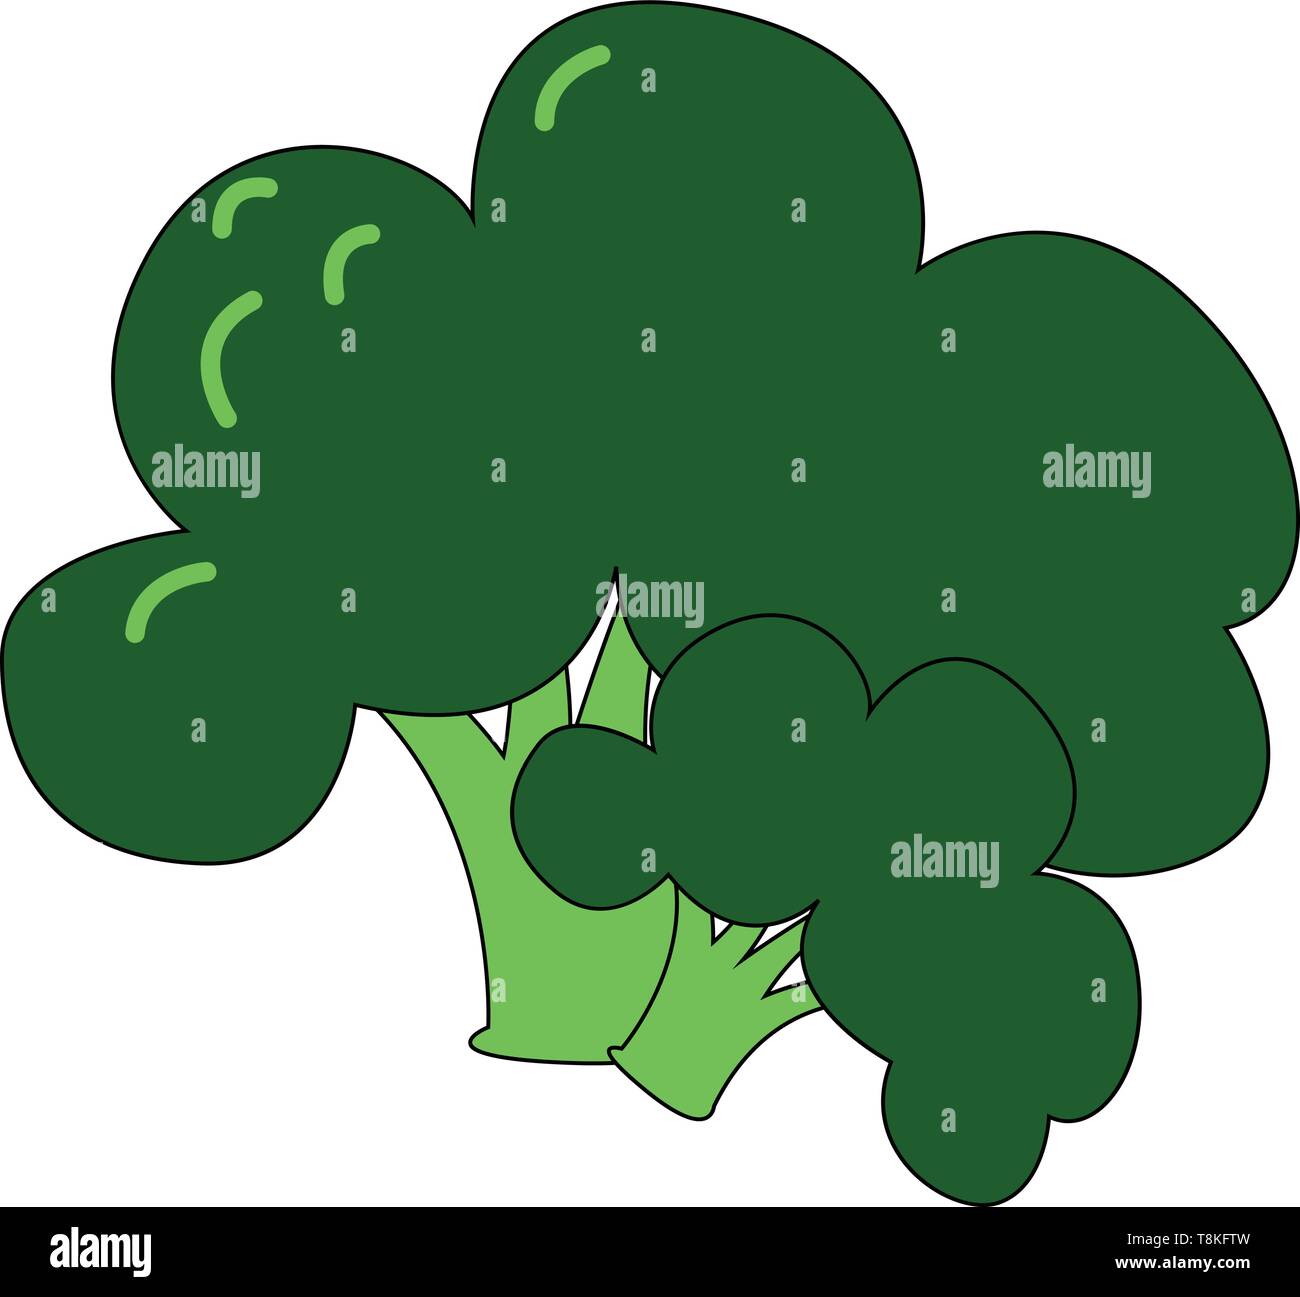 Broccoli is a vegetable with dense cluster of tight green flower buds. There are several kinds of broccoli., vector, color drawing or illustration. Stock Vector